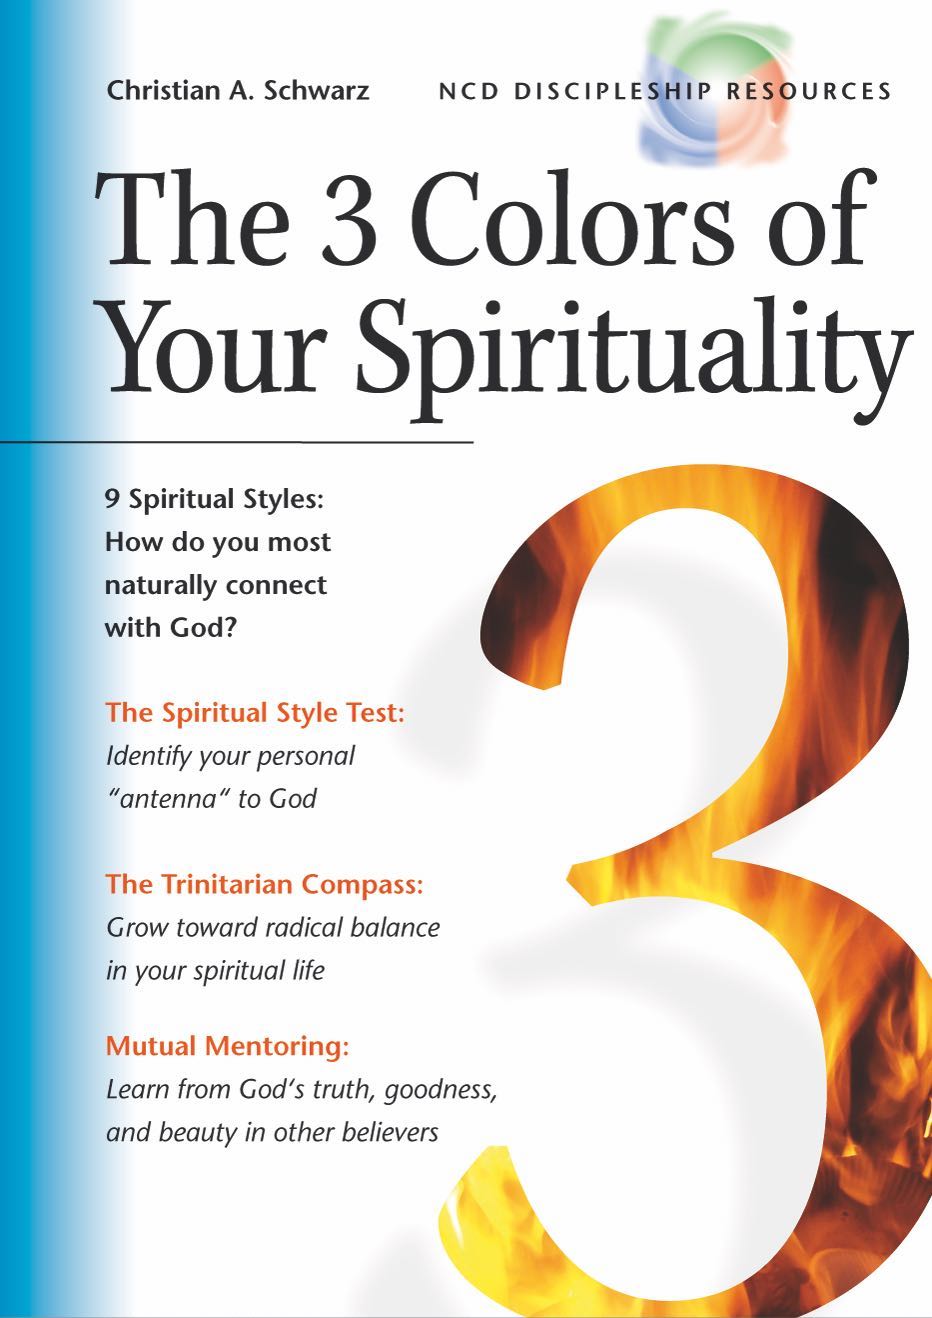 The 3 Colors of Your Spirituality